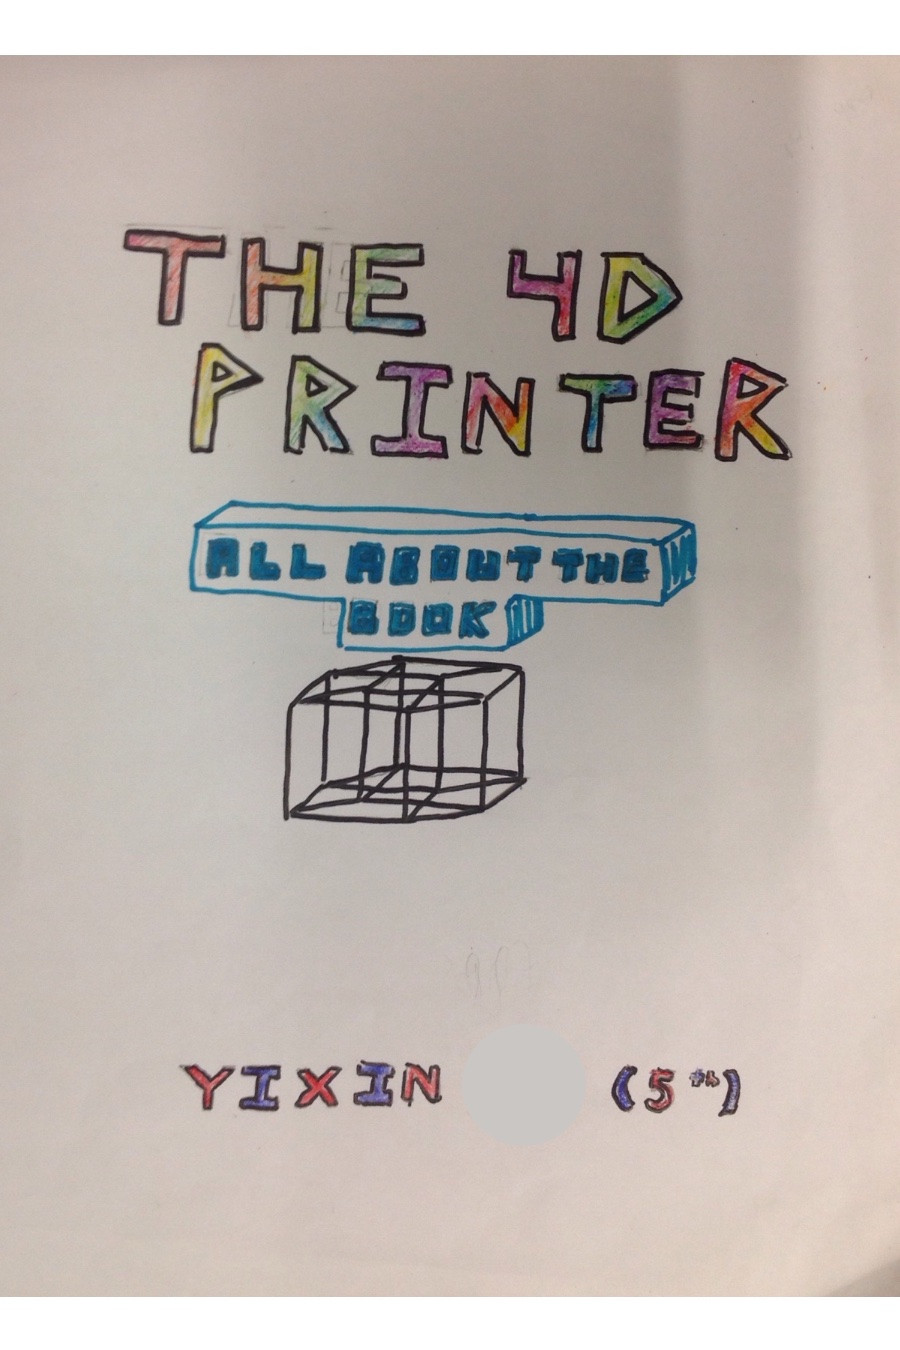 About The 4D Printer by Yixin X